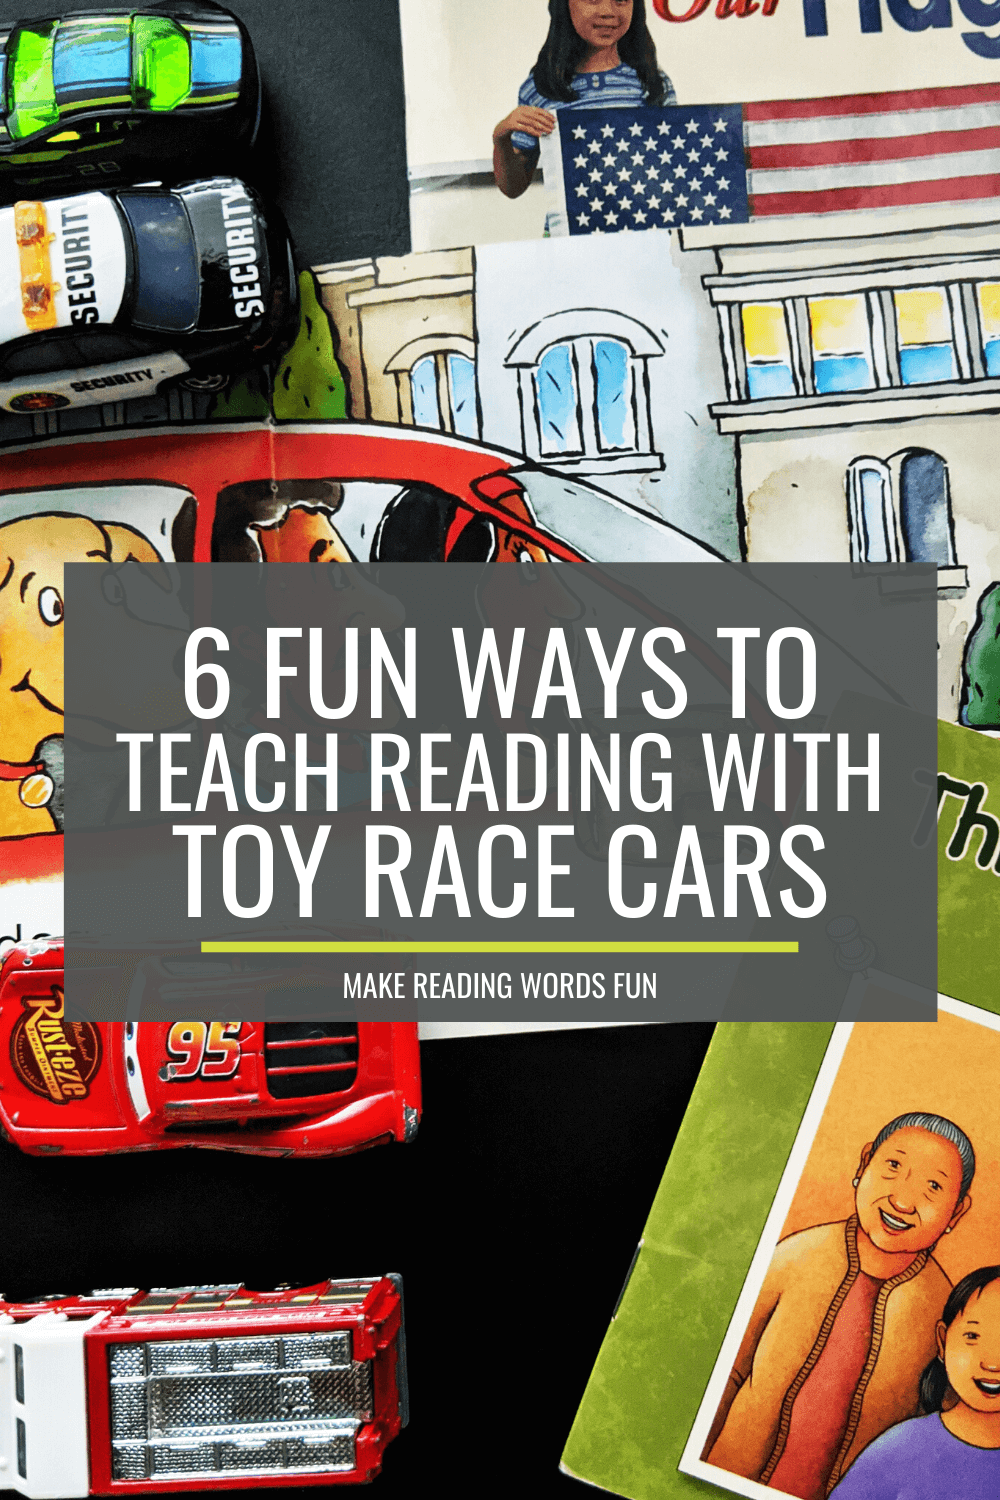 6 Fun Ways to Teach Reading With Toy Race Cars